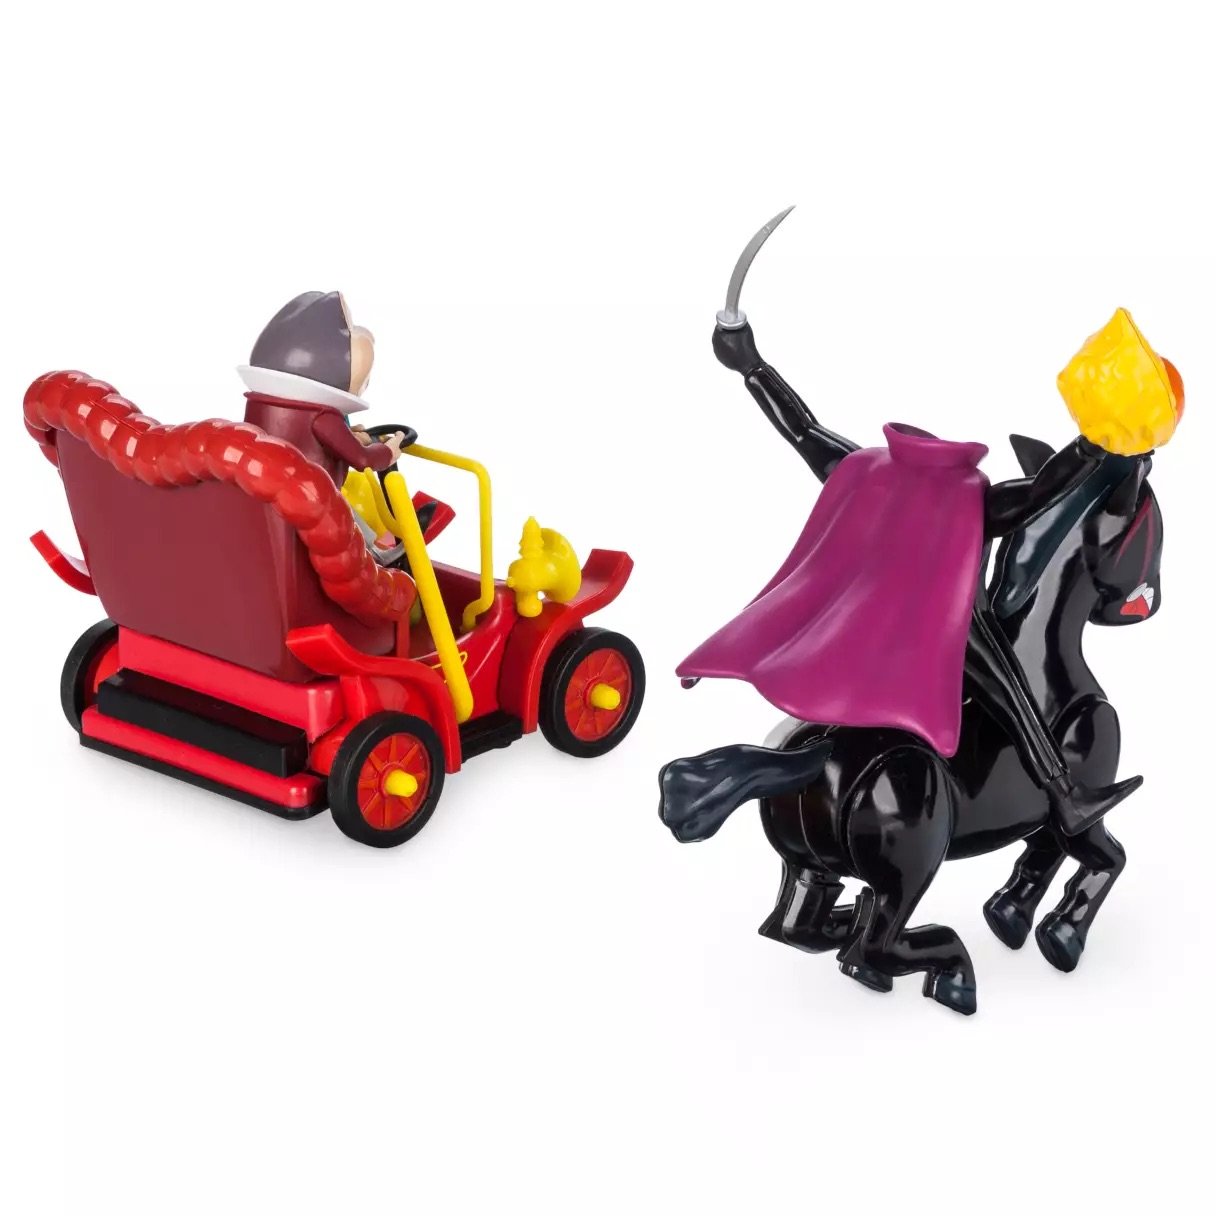 Mr. Toad and Headless Horseman Toy Set